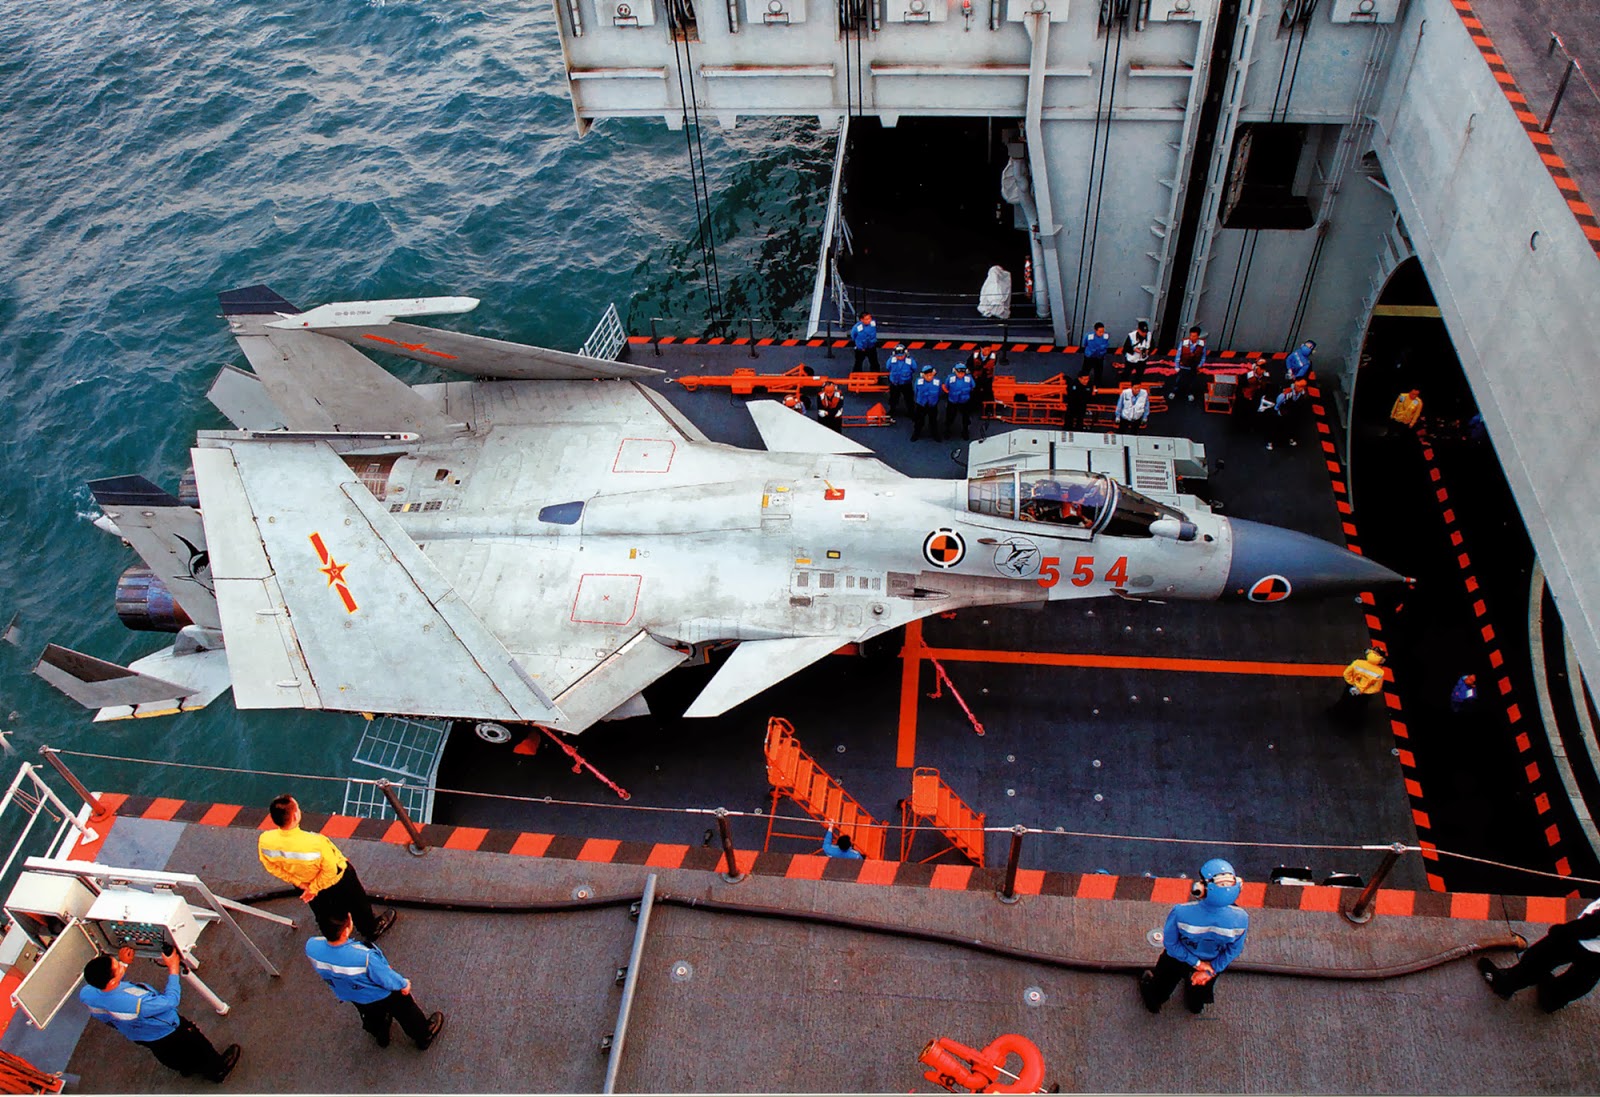 Shenyang J-15 Chinese+J-15+Flying+Shark+Carrier+Borne+Naval+Fighter+Jet+which+can+carry+SD-10A+PL-12+BVRAAM+along+with+YJ-83C-803+Anti-Ship+Missiles+export+pakistan+sold+operational+(3)